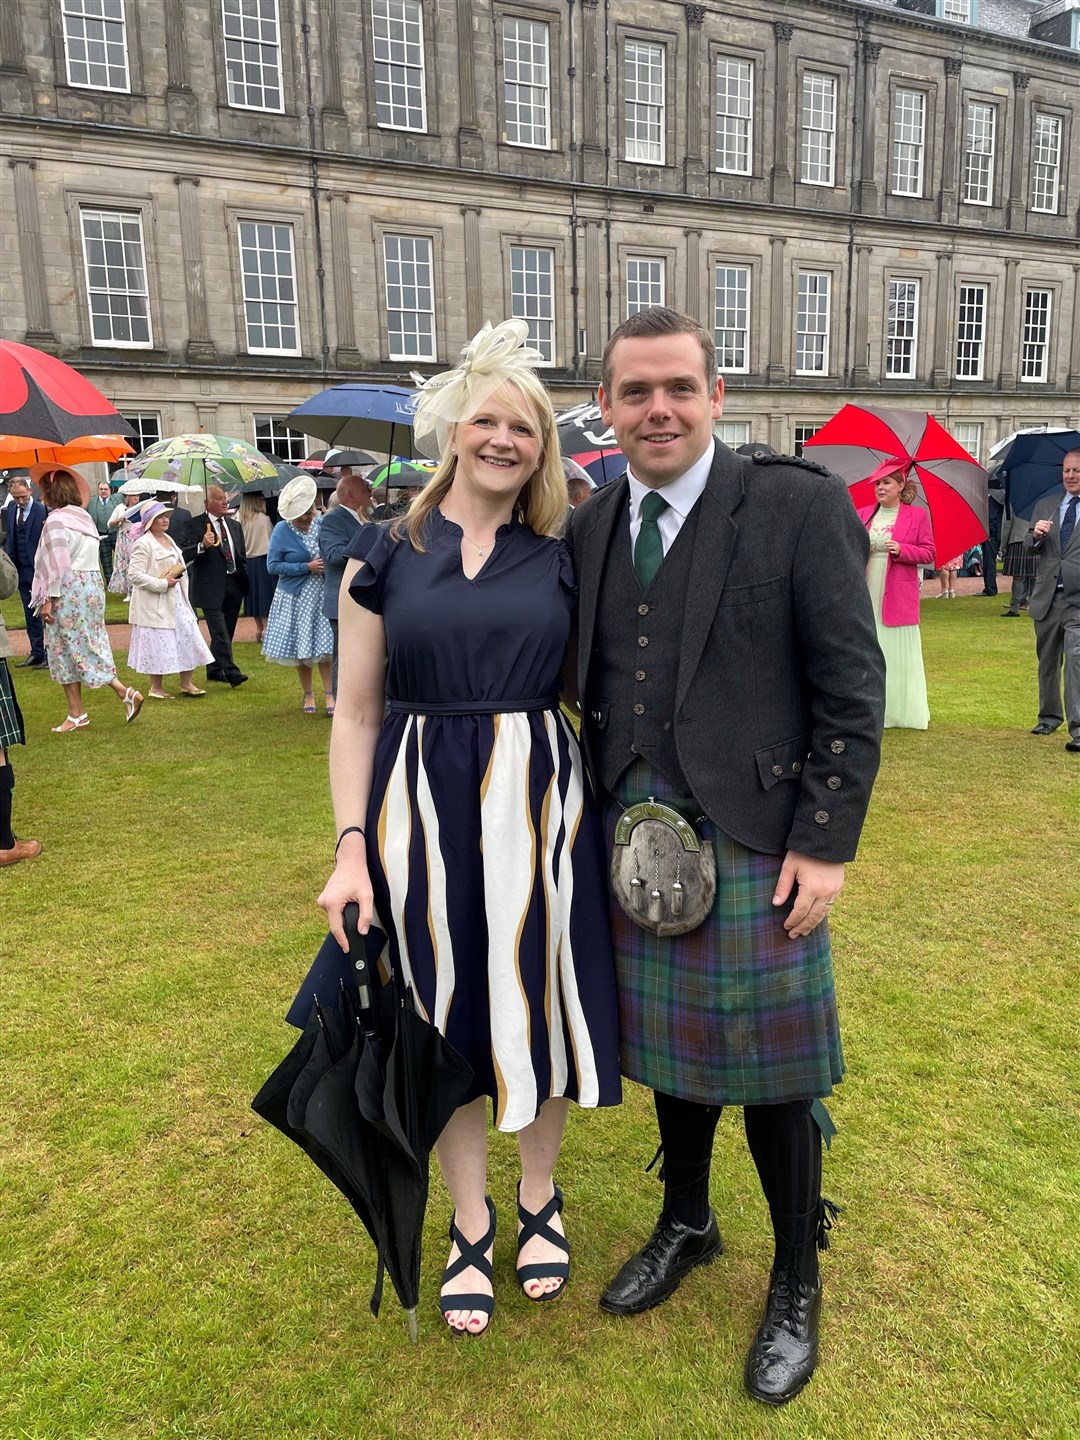 Douglas Ross and his wife Krystle at the garden party at Holyrood Palace.